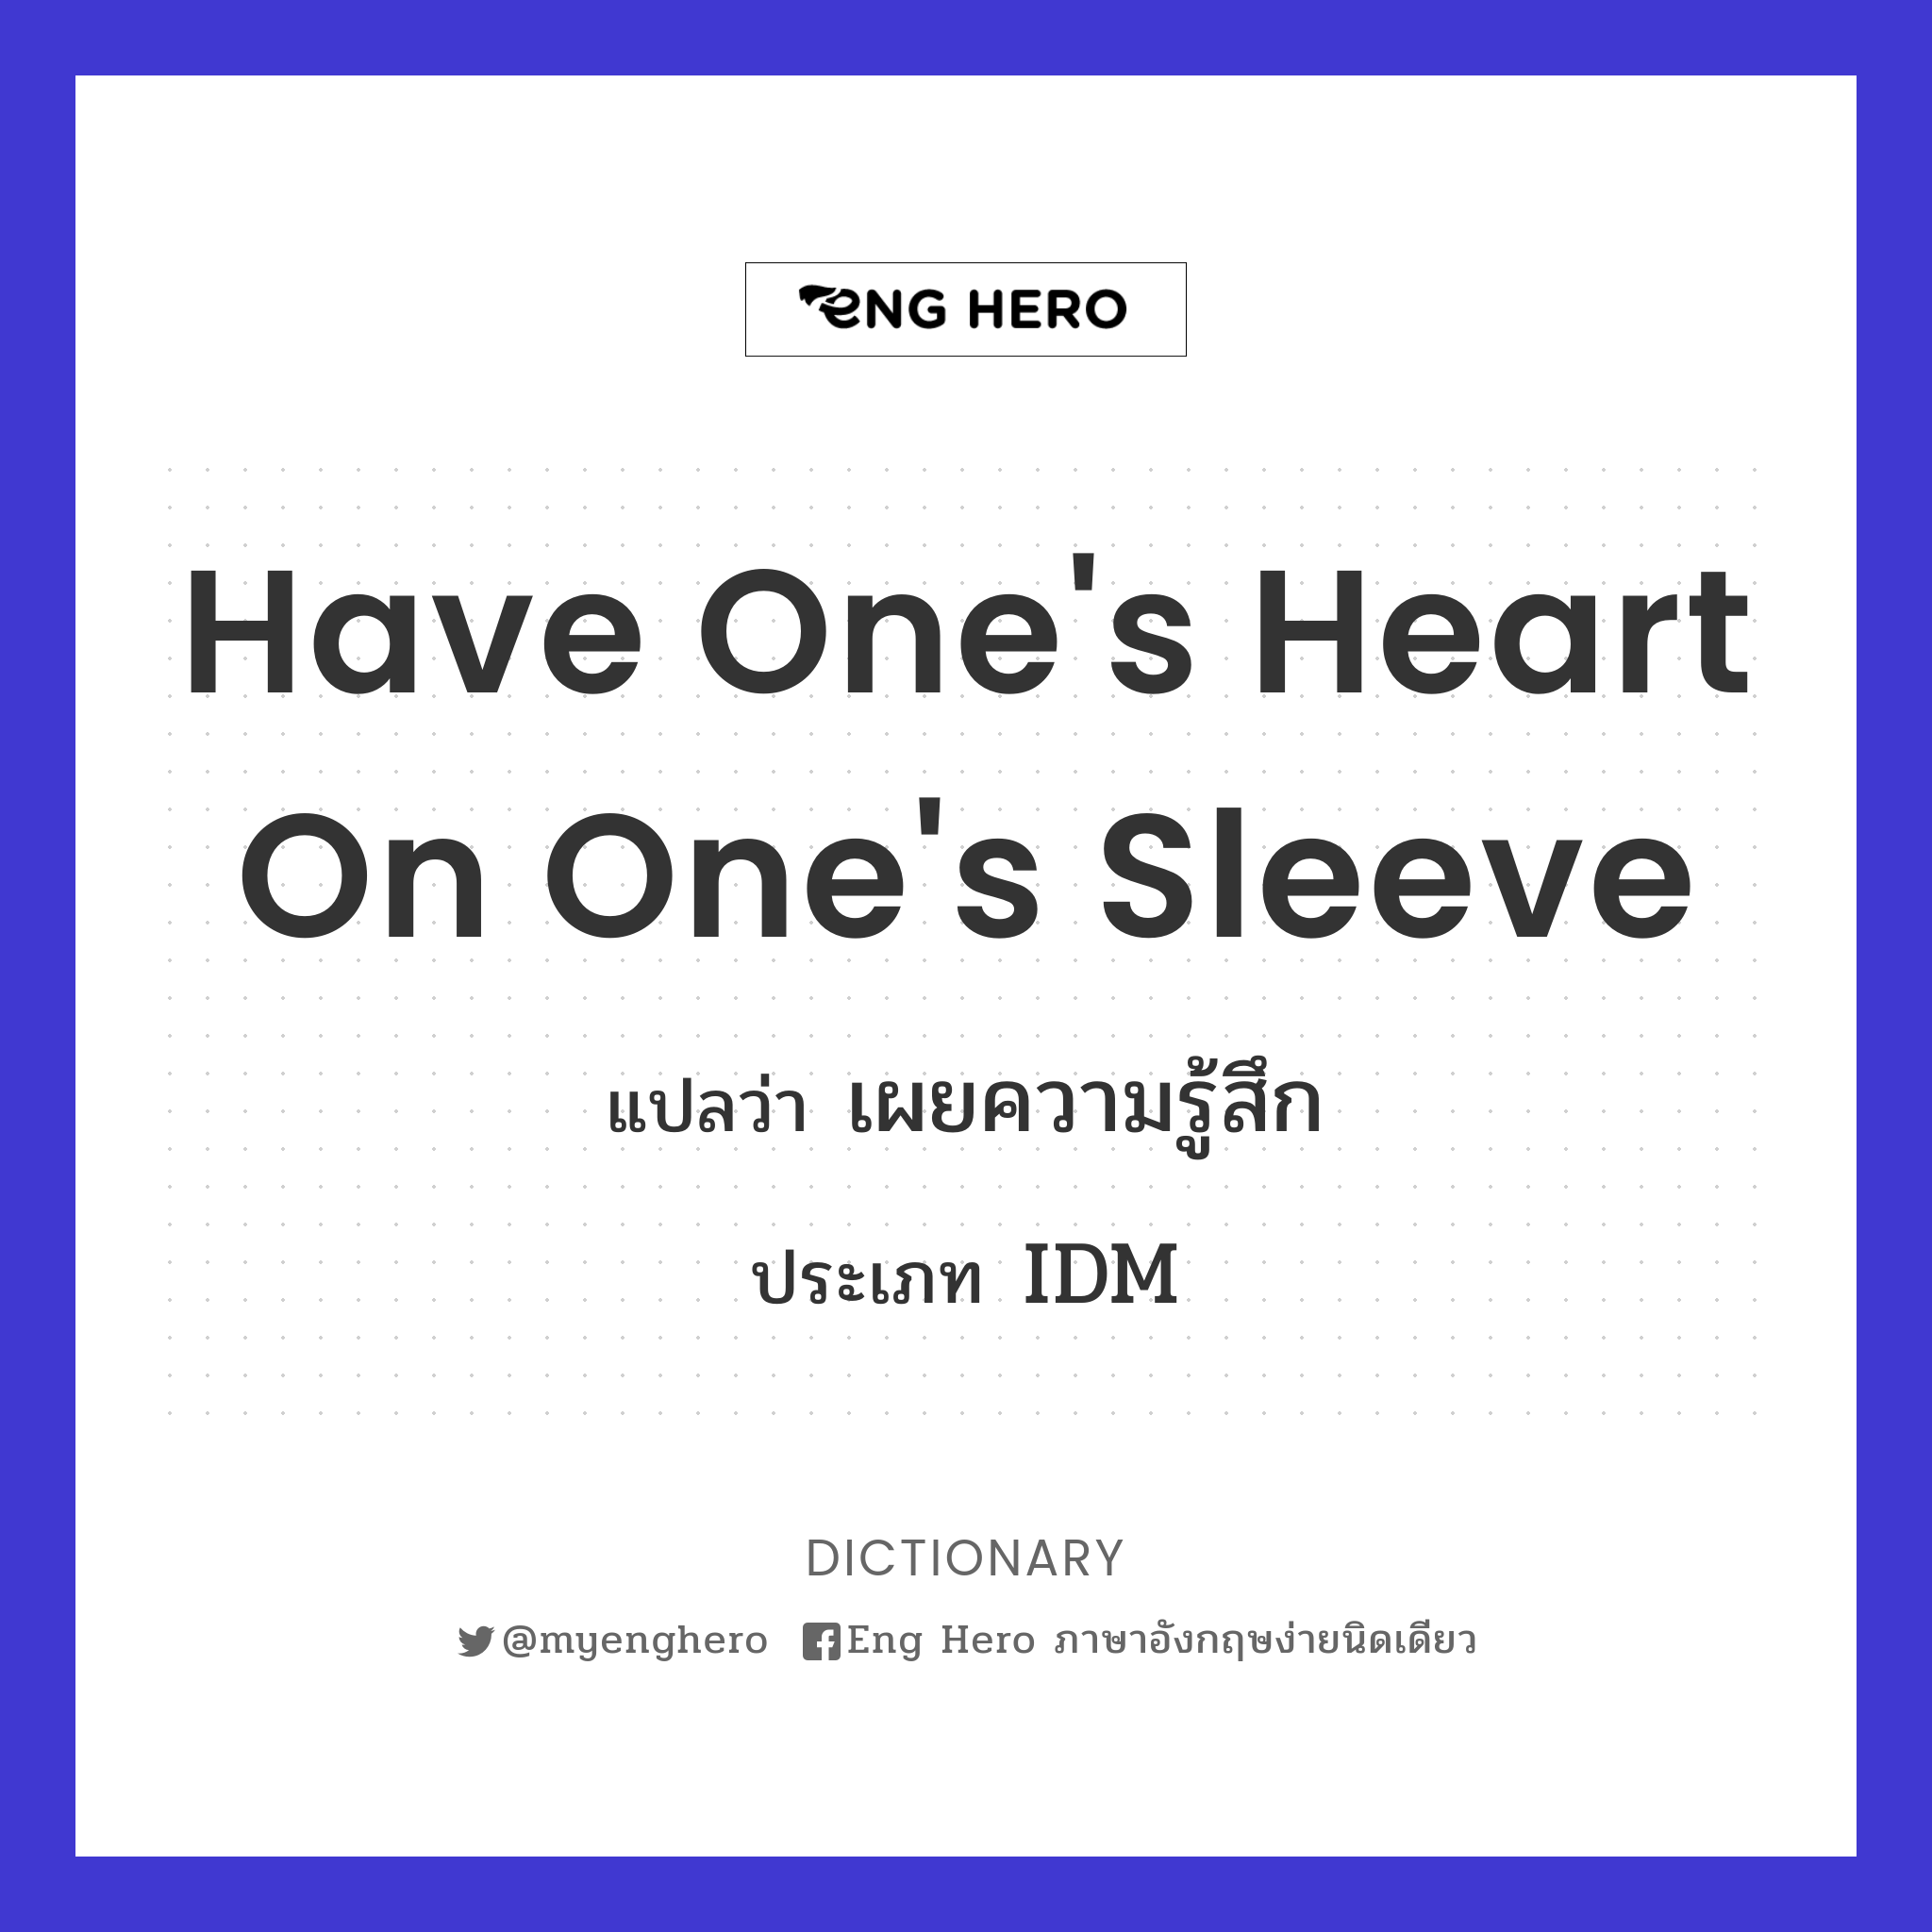 have one's heart on one's sleeve